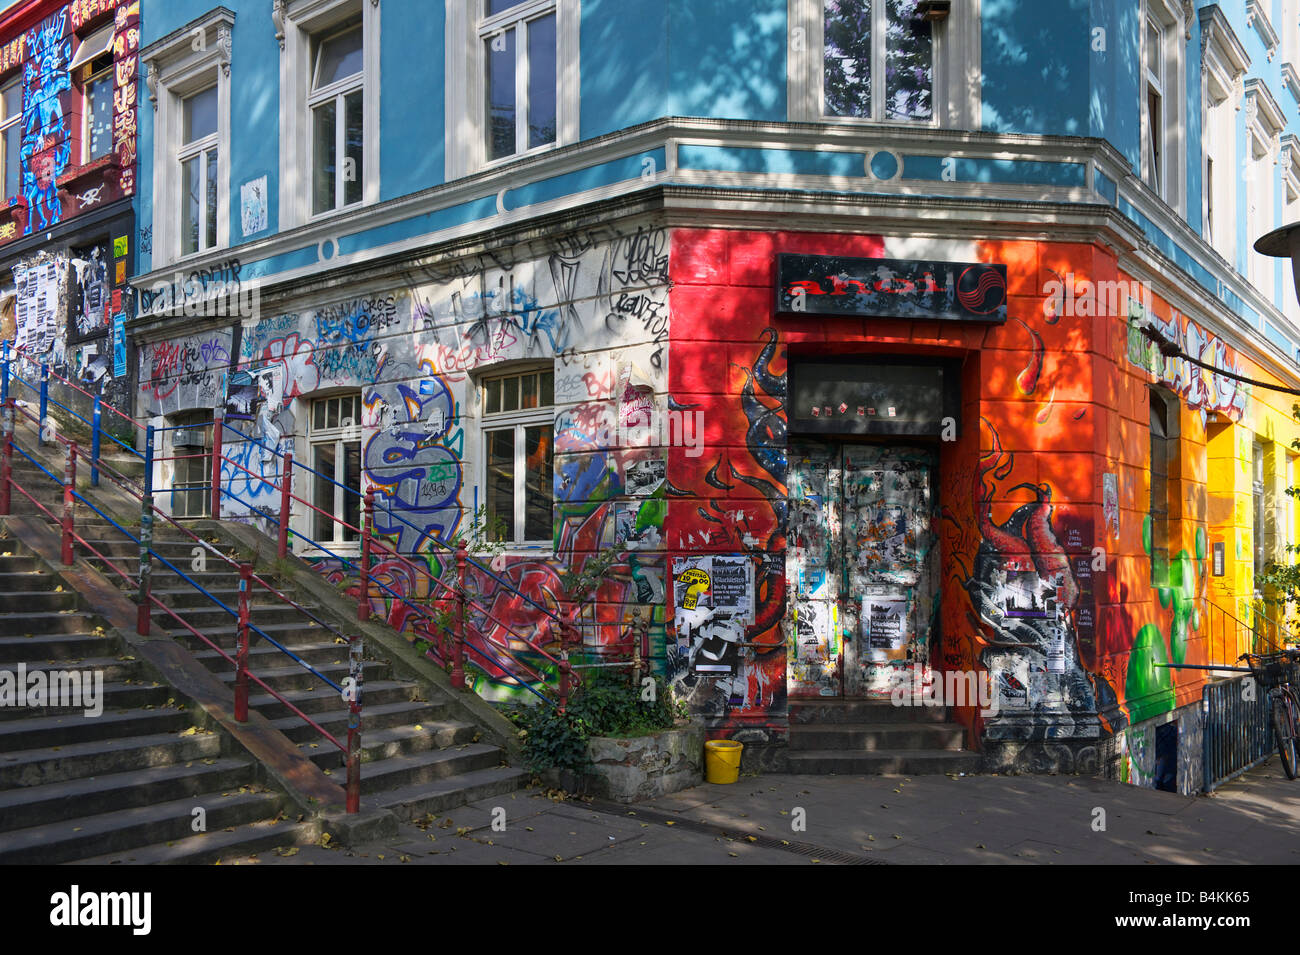 Graffiti and wall art cover a shop and apartments in the St Pauli district of Hamburg Germany Stock Photo